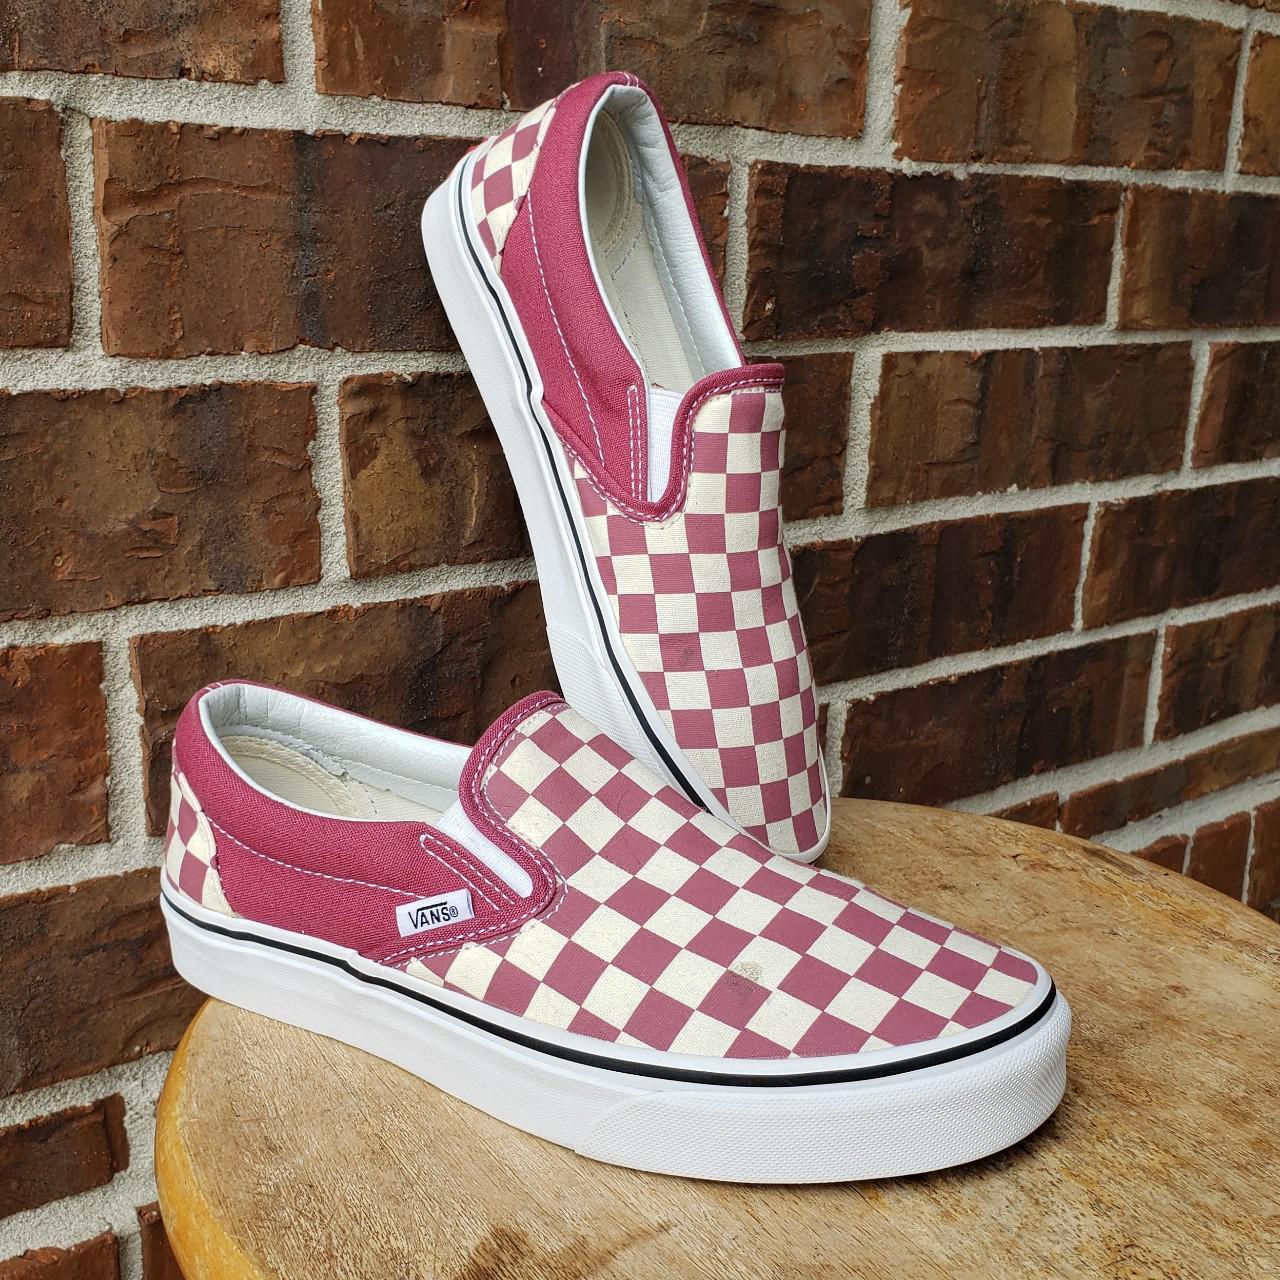 Vans Women's White and Pink